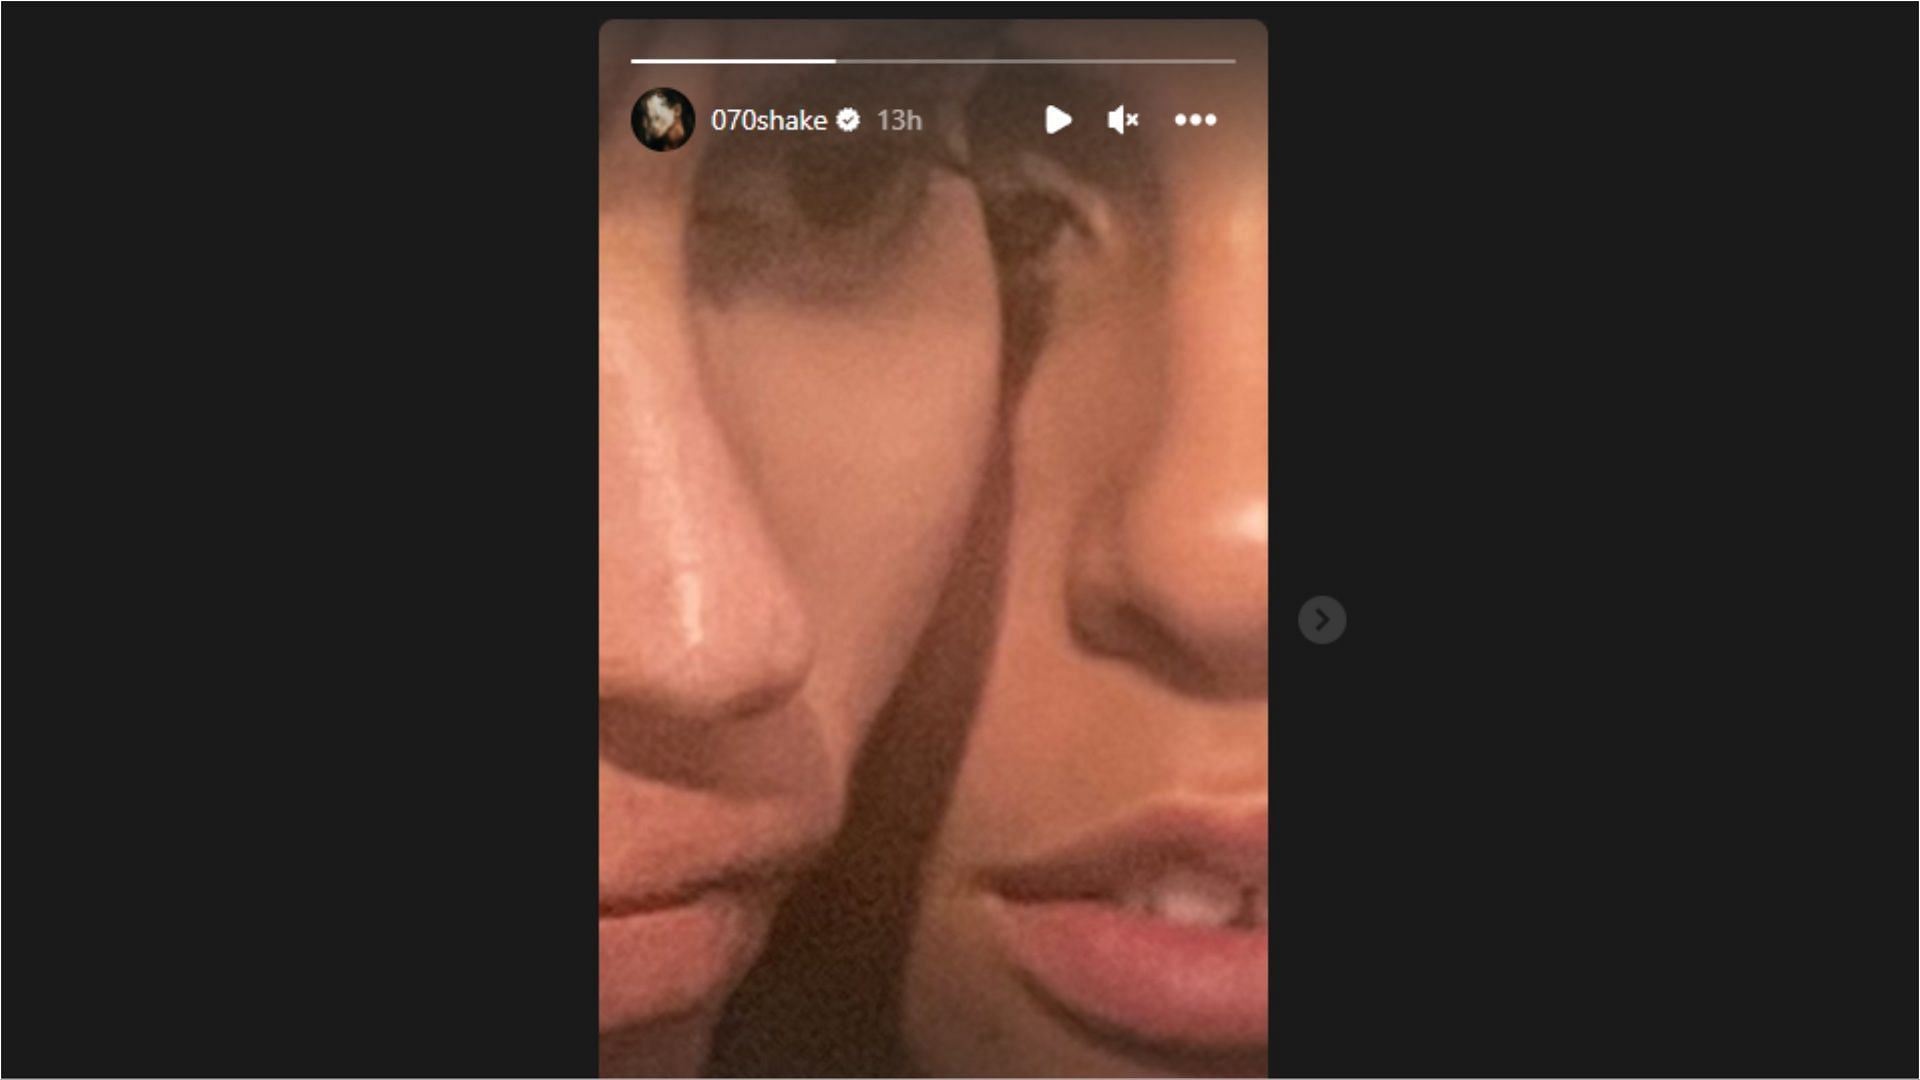 070 Shake posted a close-up picture featuring with Lily-Rose Depp (Image via 070shake/Instagram)